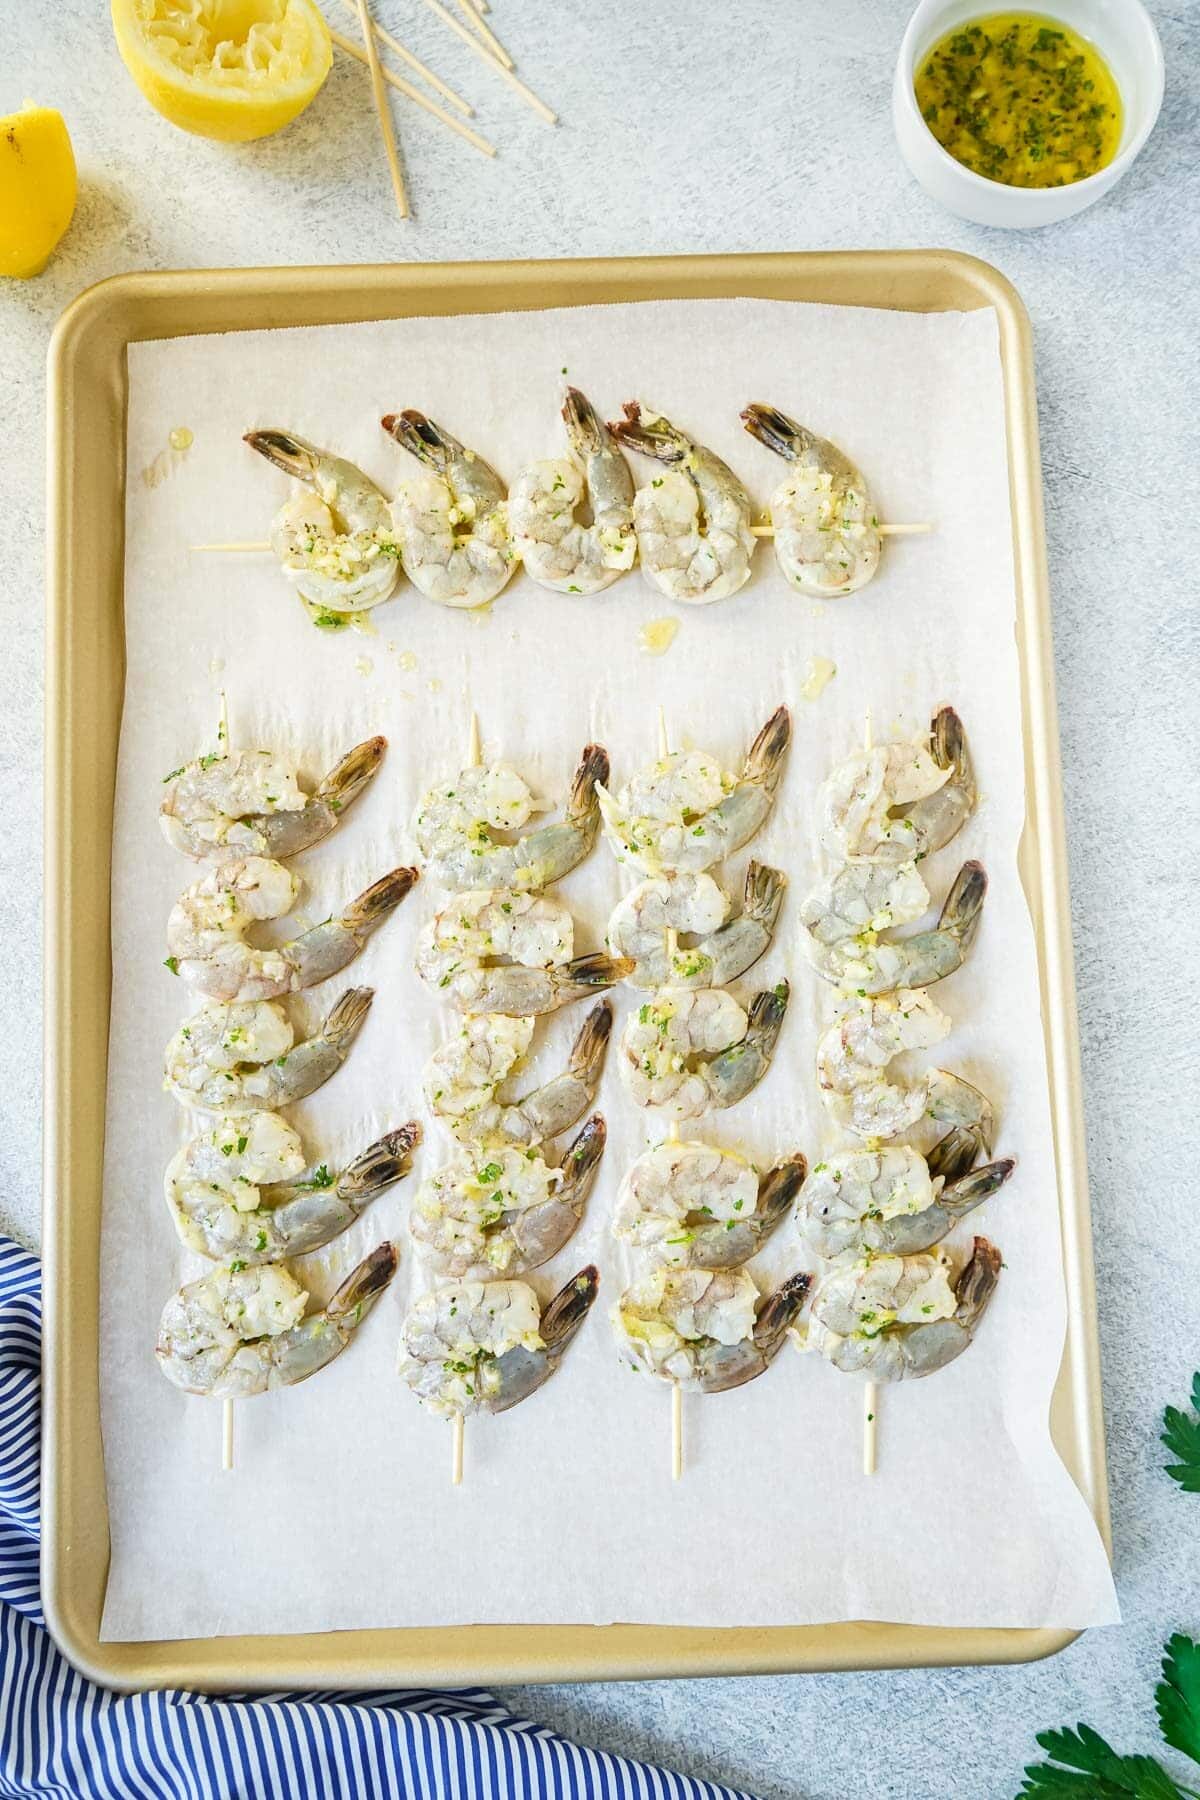 Shrimp skewers on a baking sheet before being baked.